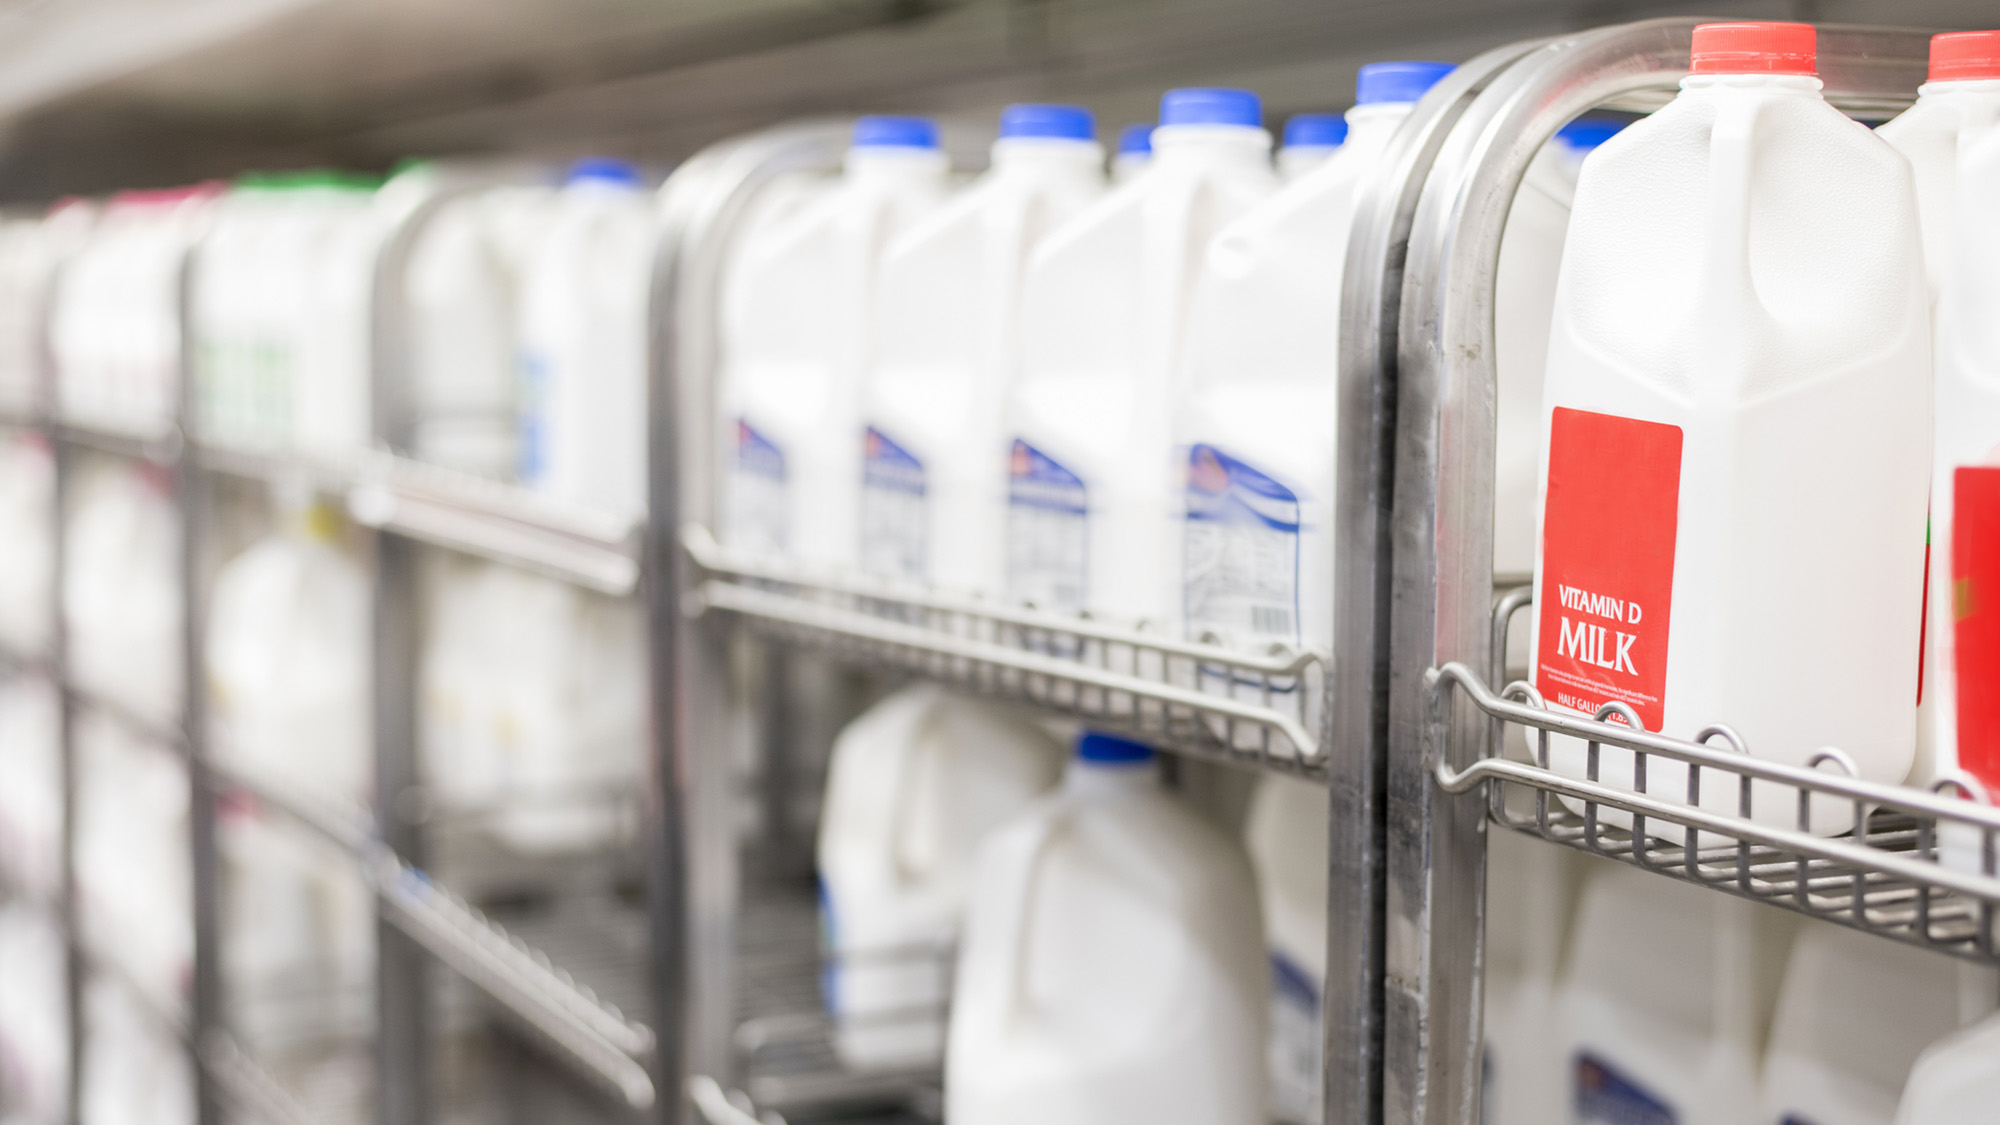 Rows of plastic milk jugs arranged in a refrigerated cooler at a grocery store.